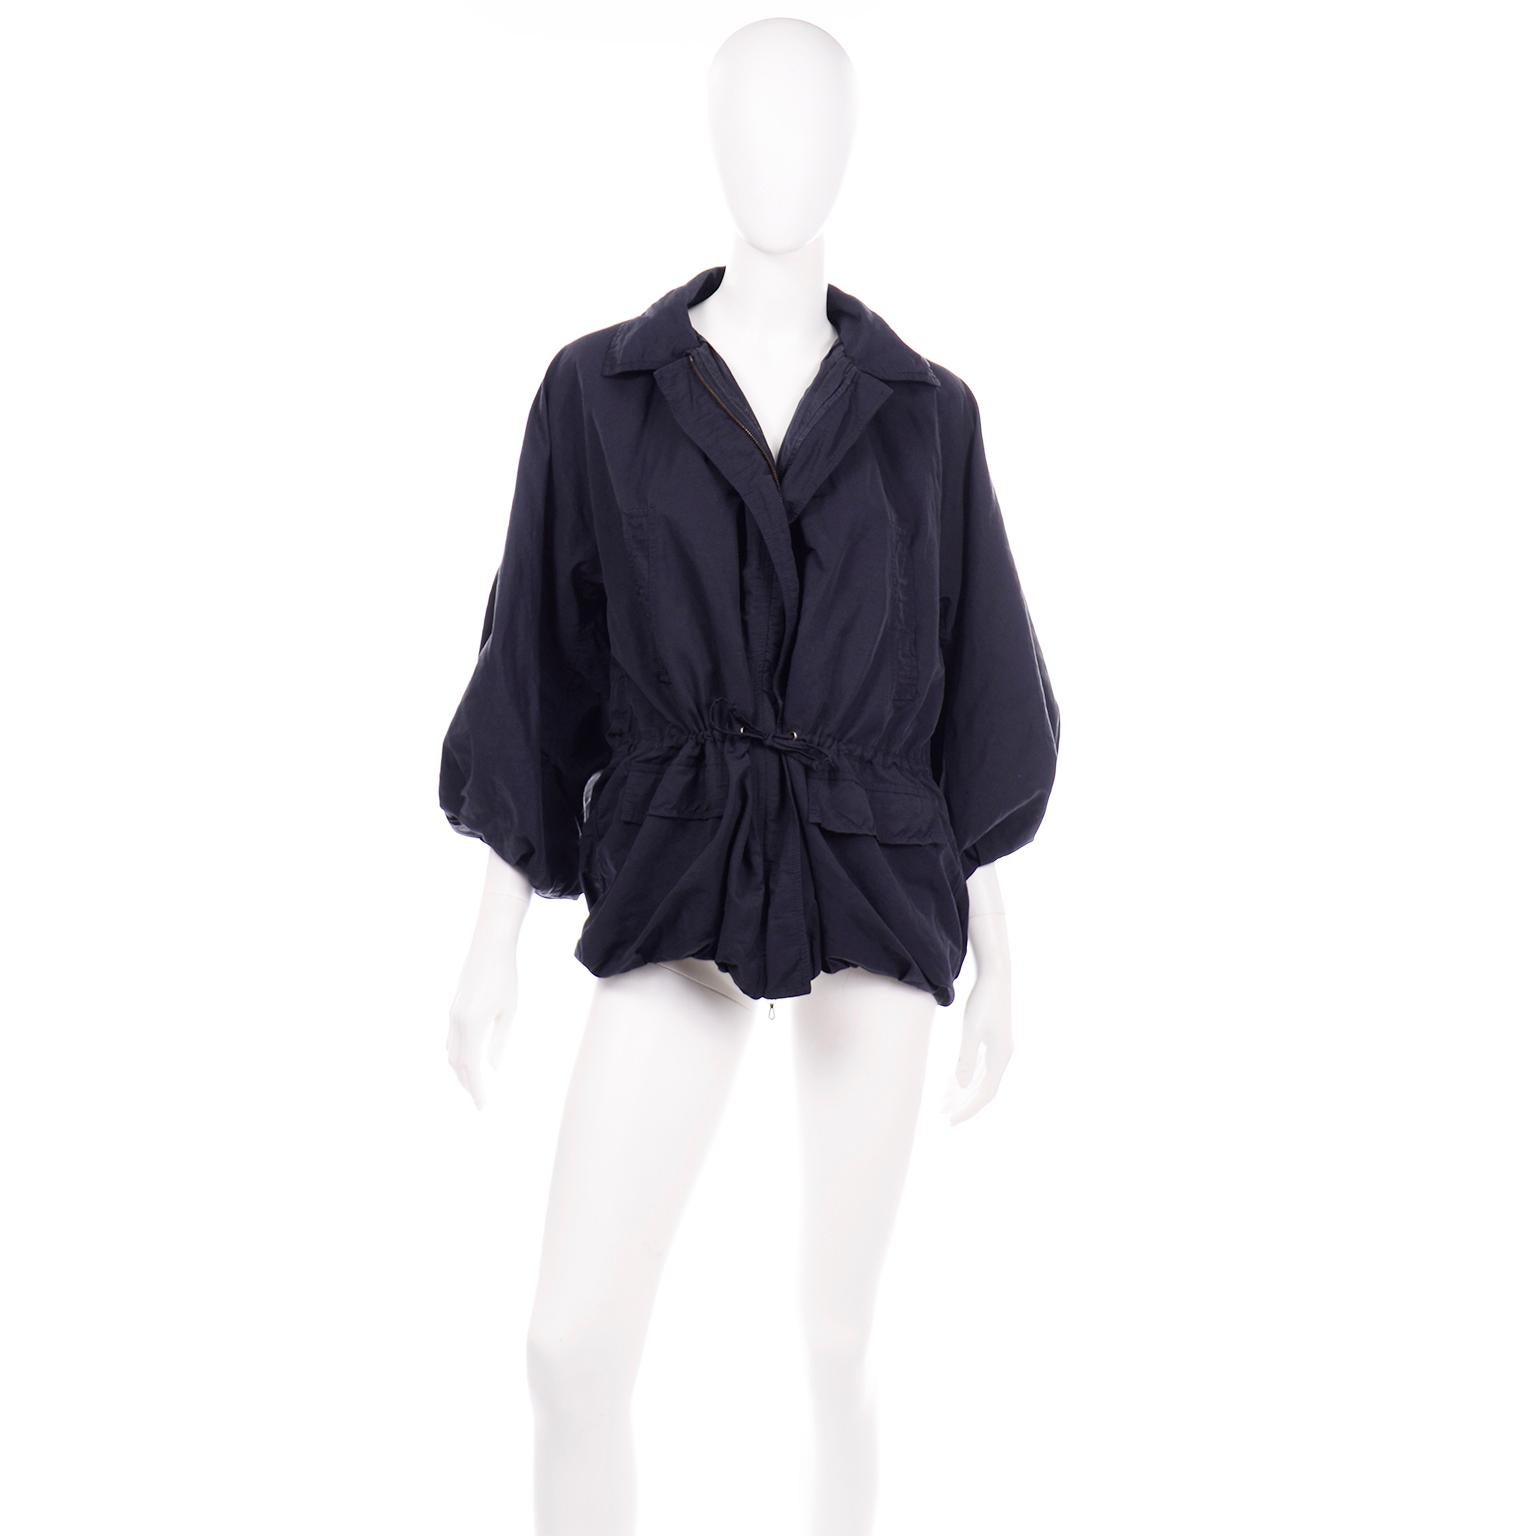 We are in love with this Lanvin Spring Summer 2010 Midnight blue jacket! The jacket was designed by Alber Elbaz and is a great example of his incredible talent. The jacket has a fabulous bubble hem, a front zipper, drawstring, voluminous statement